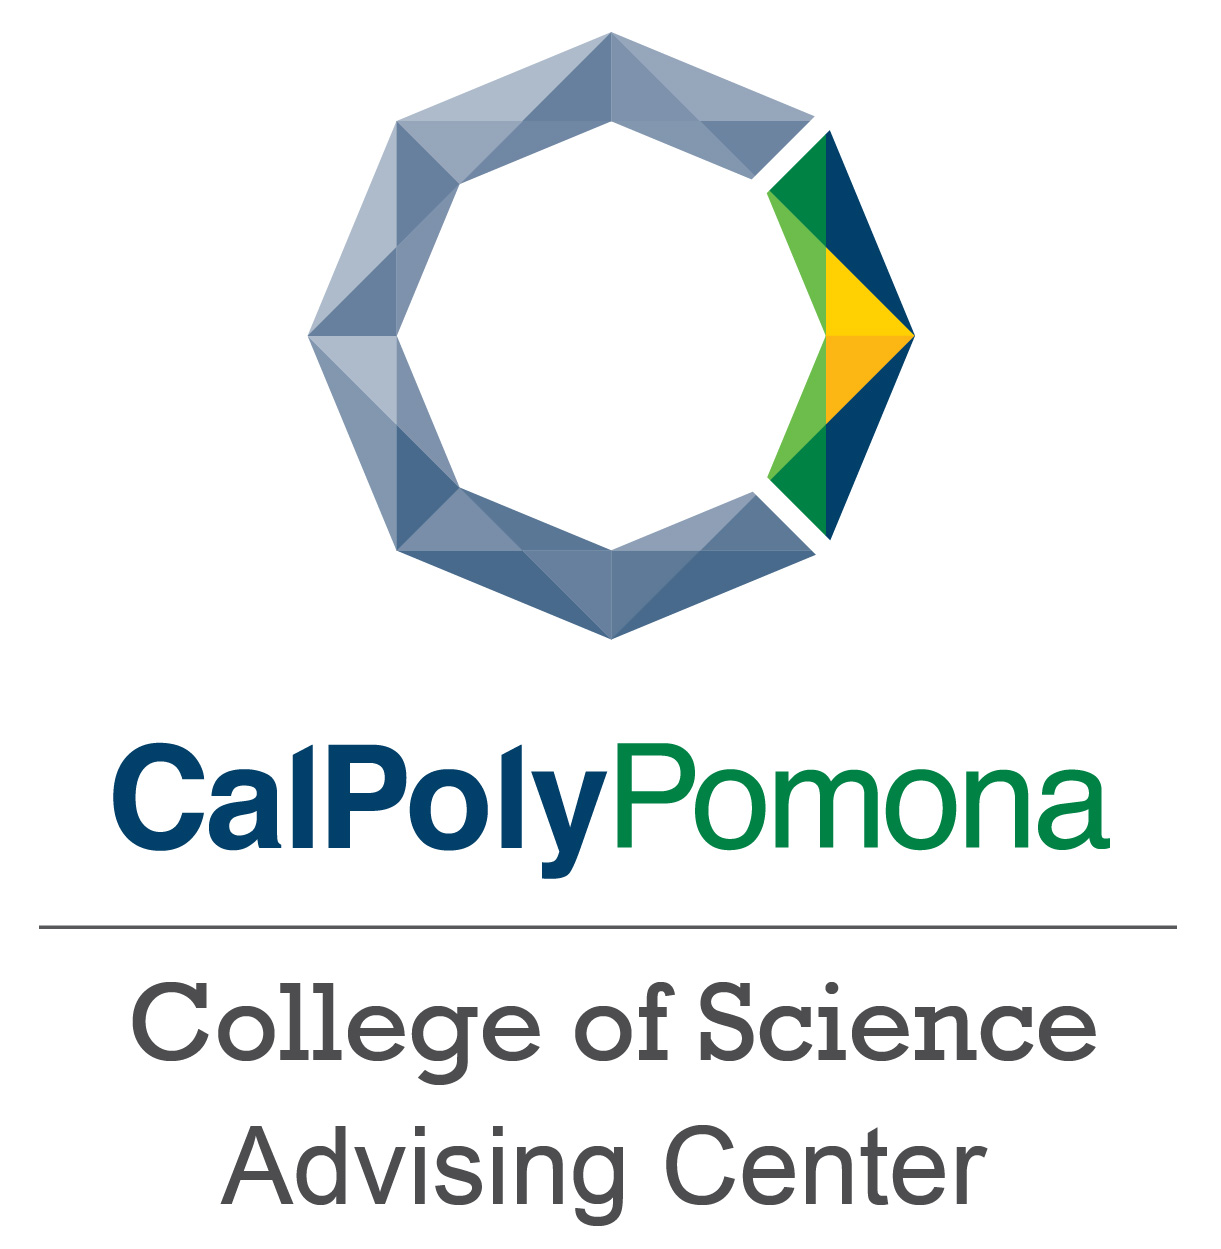 Cal Poly Pomona College of Science Advising Center